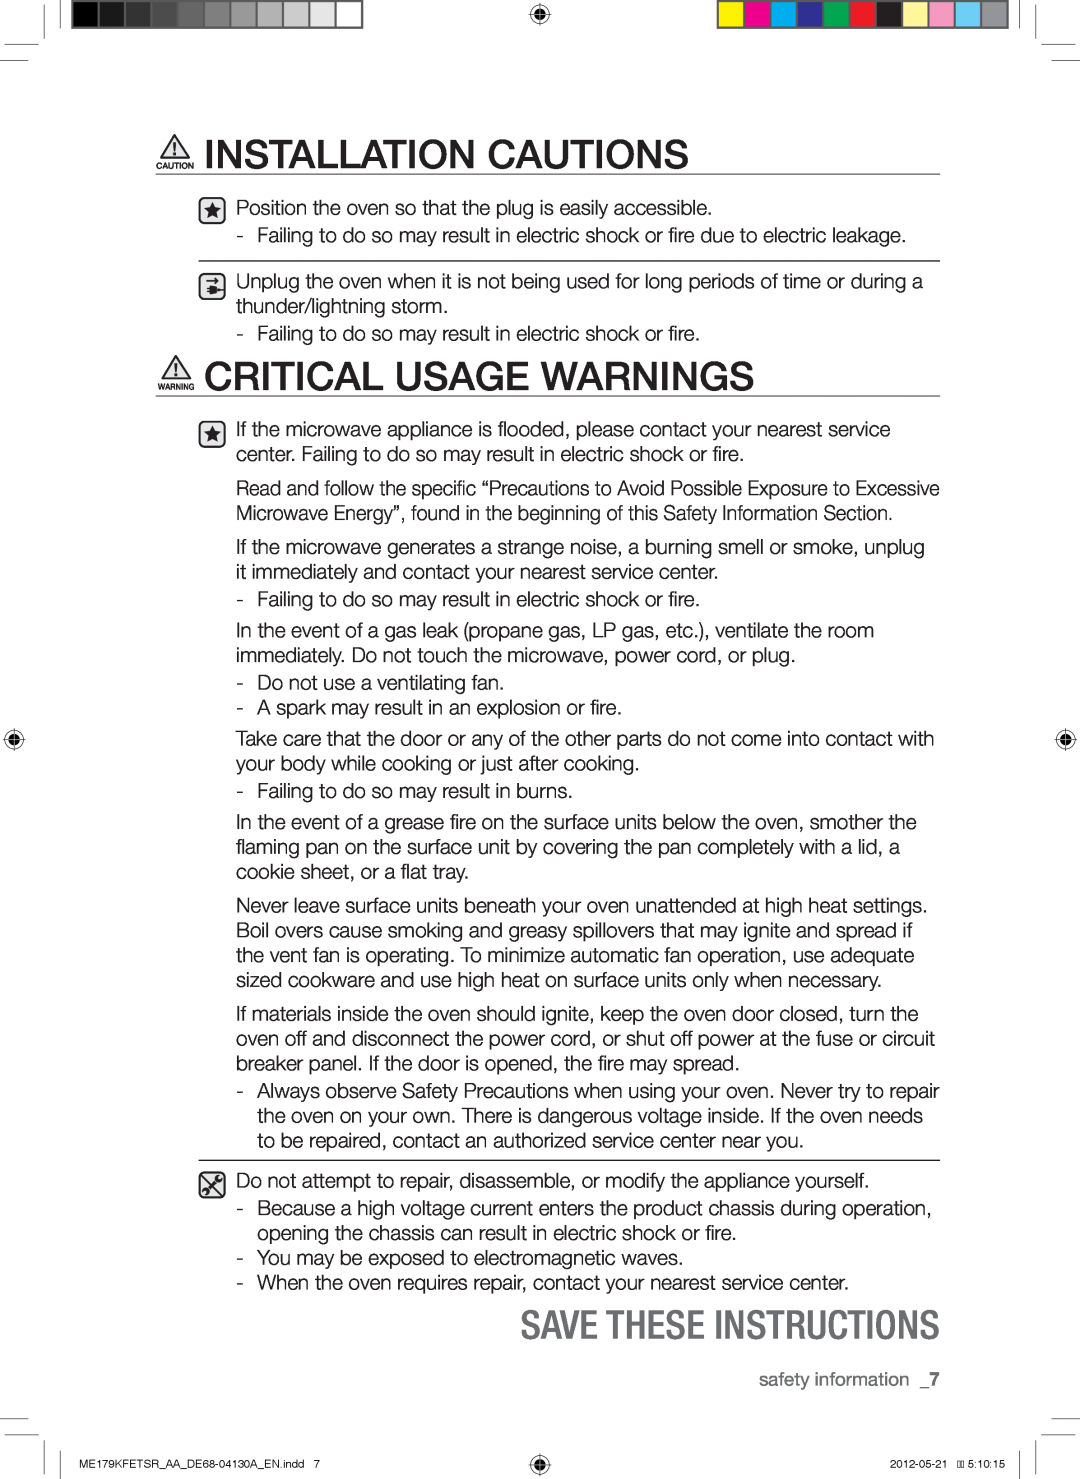 Samsung ME179KFETSR user manual Caution Installation Cautions, Warning Critical Usage Warnings, Save These Instructions 